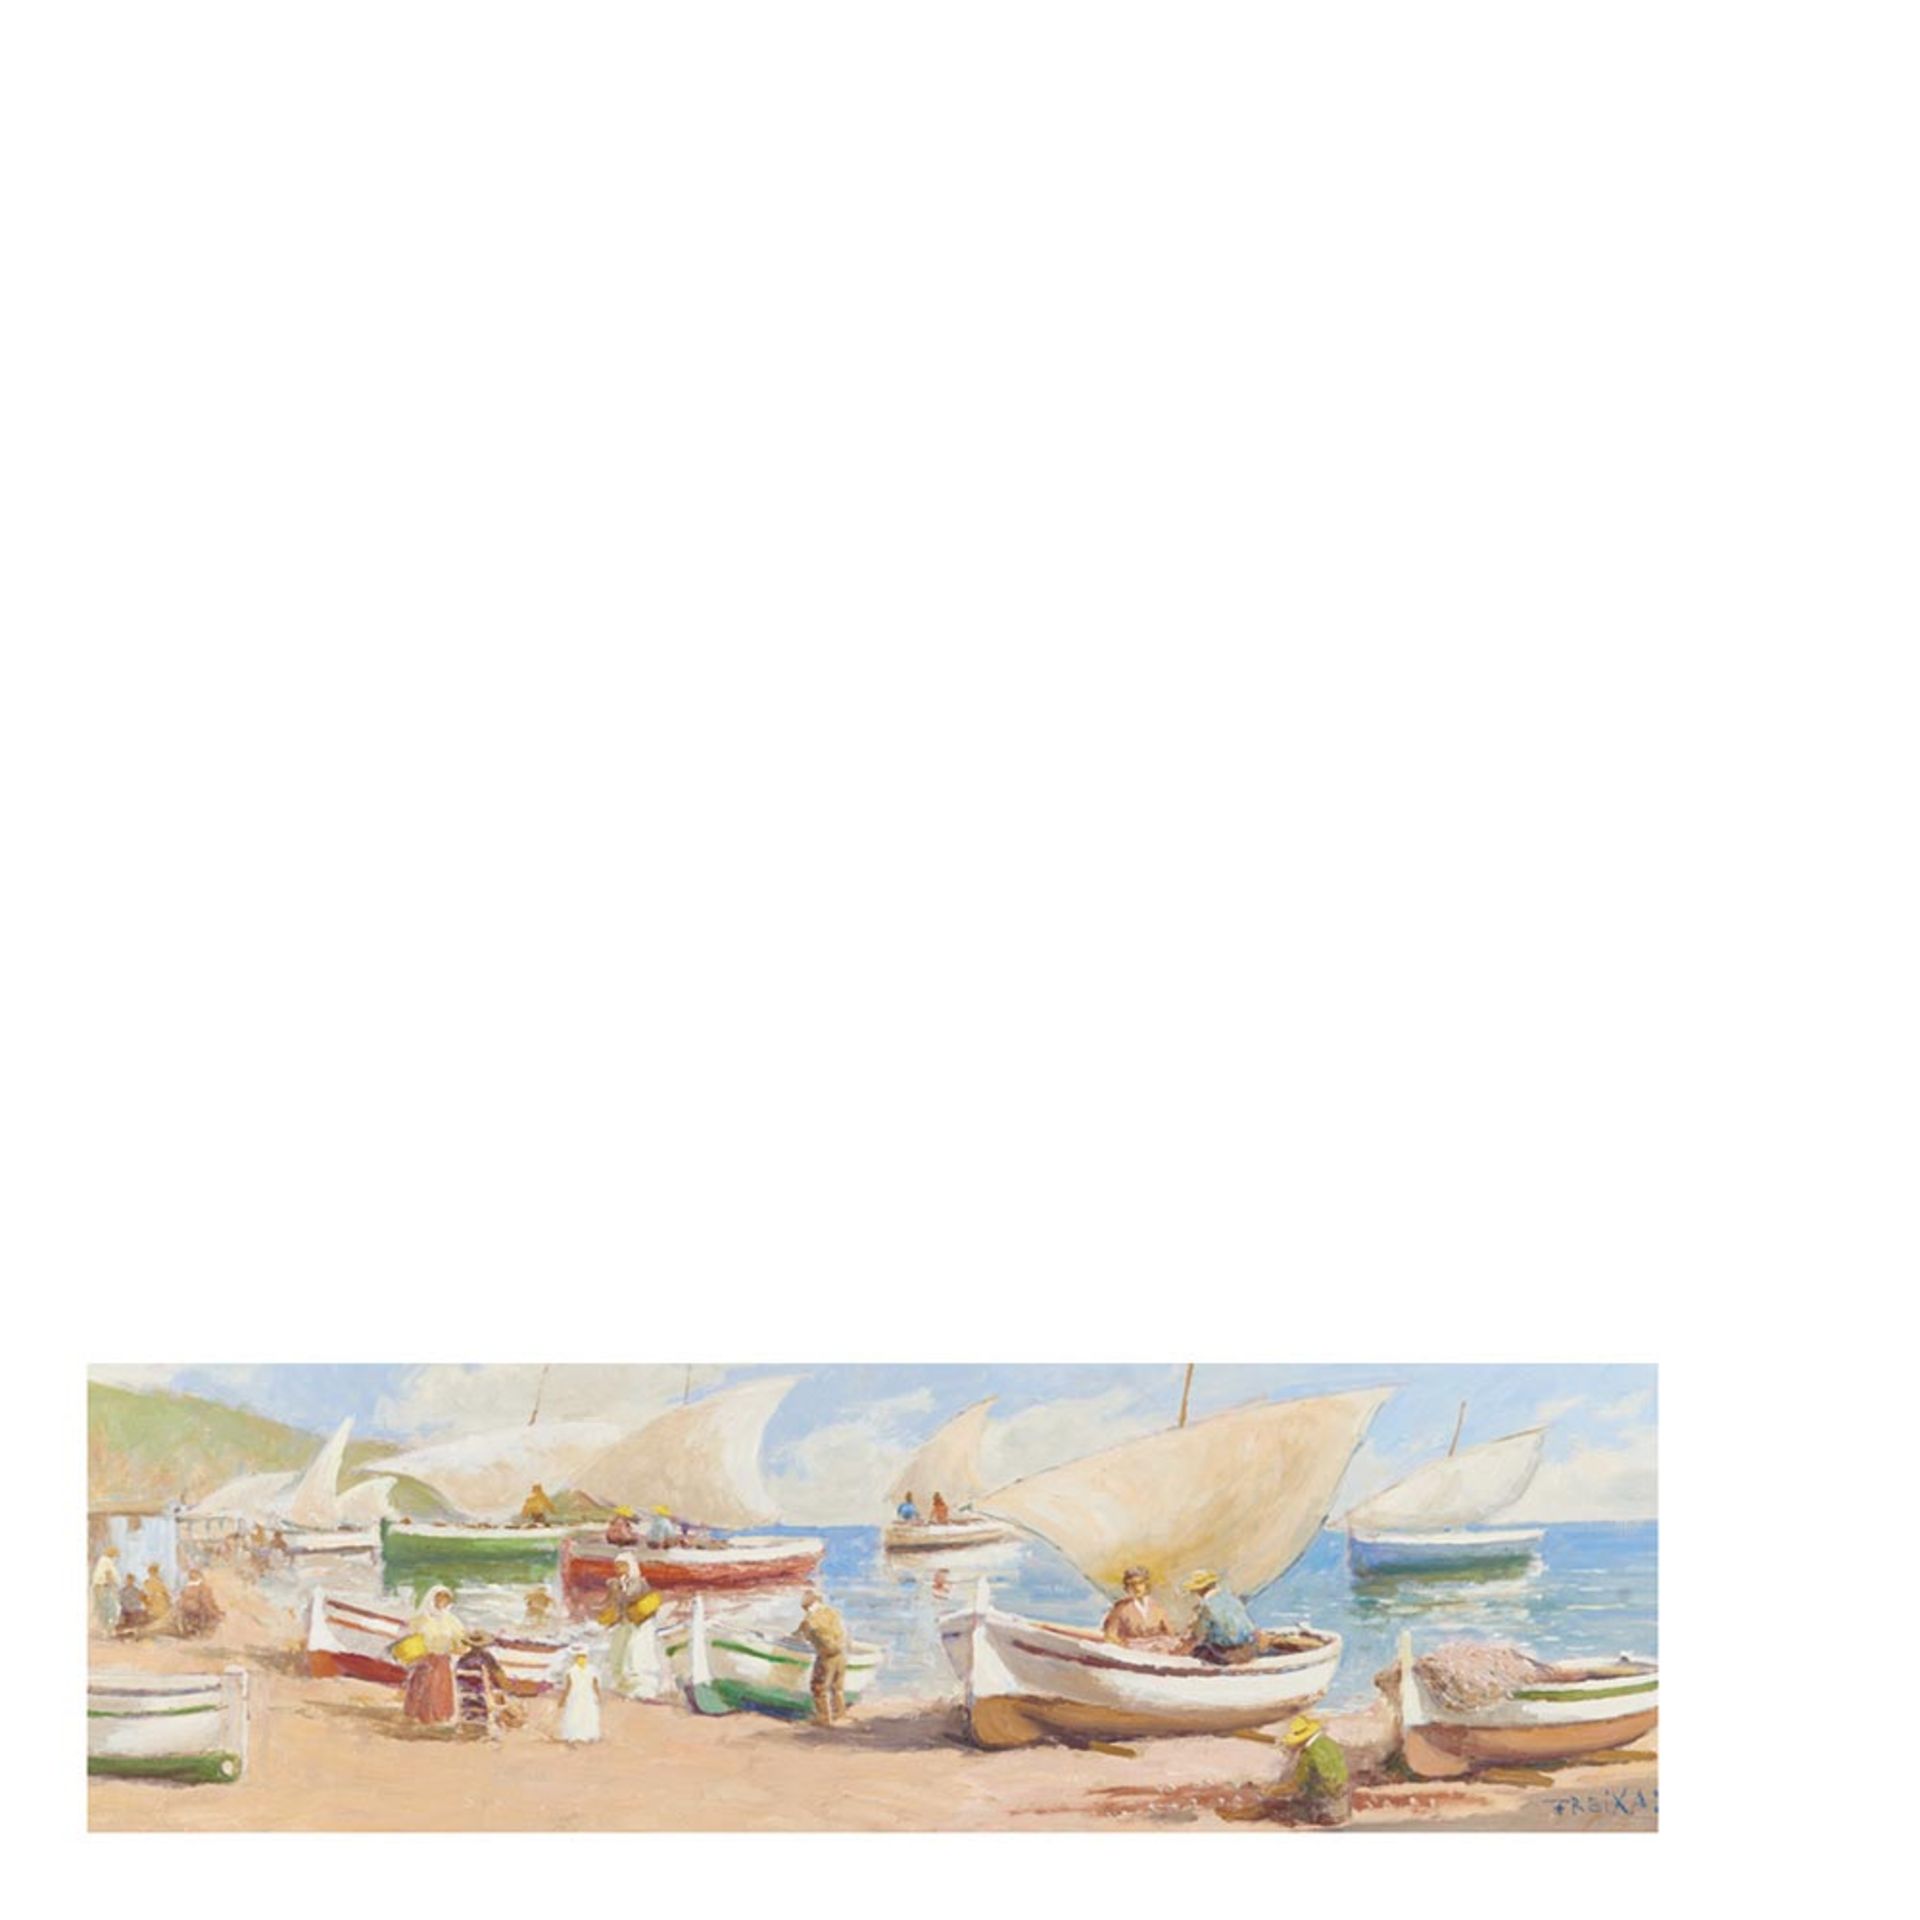 Fishermen and boats on the beach. Oil on canvas